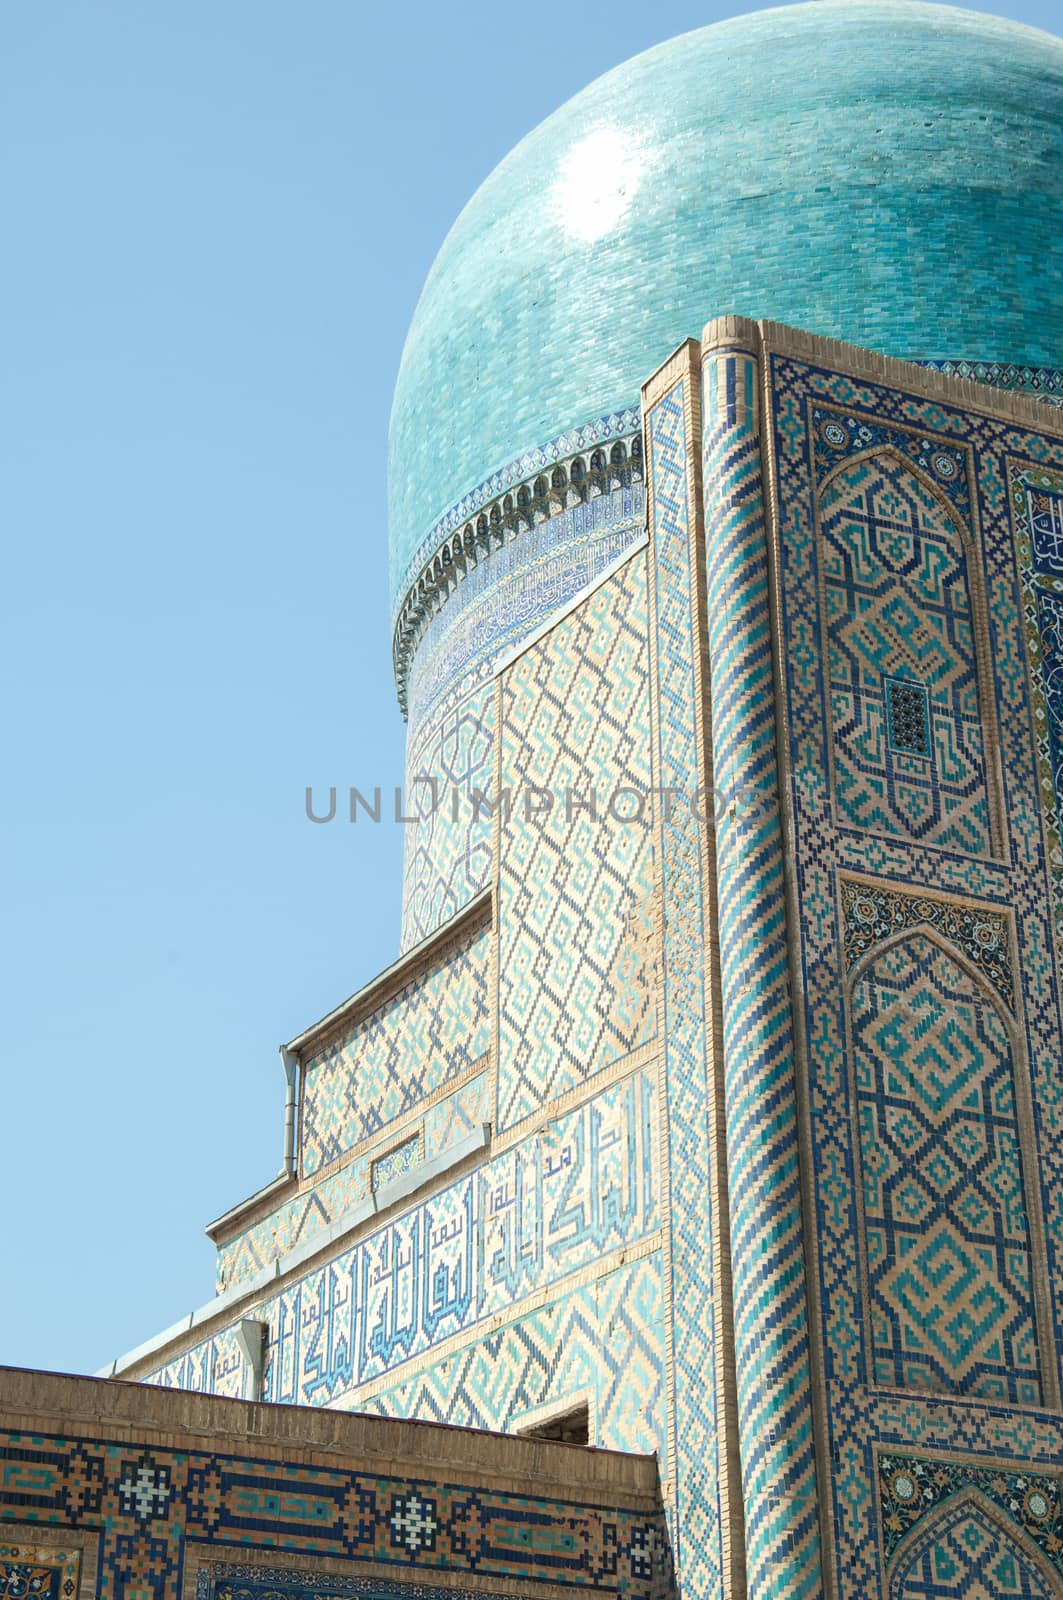 the architecture of ancient Samarkand by A_Karim